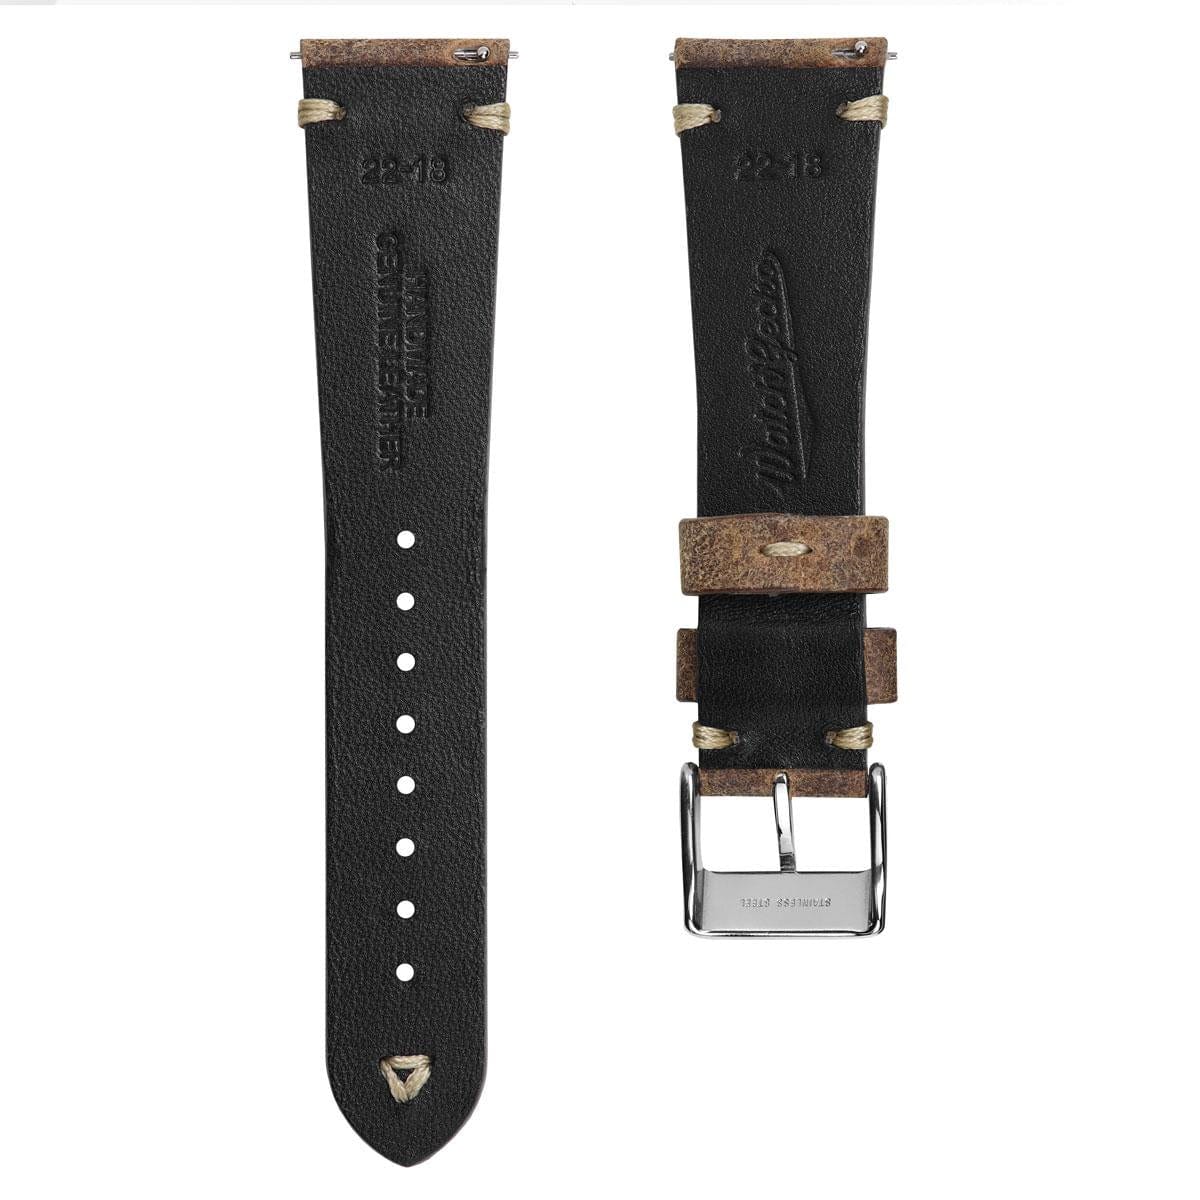 Simple Handmade Distressed Leather Watch Strap - Light Brown